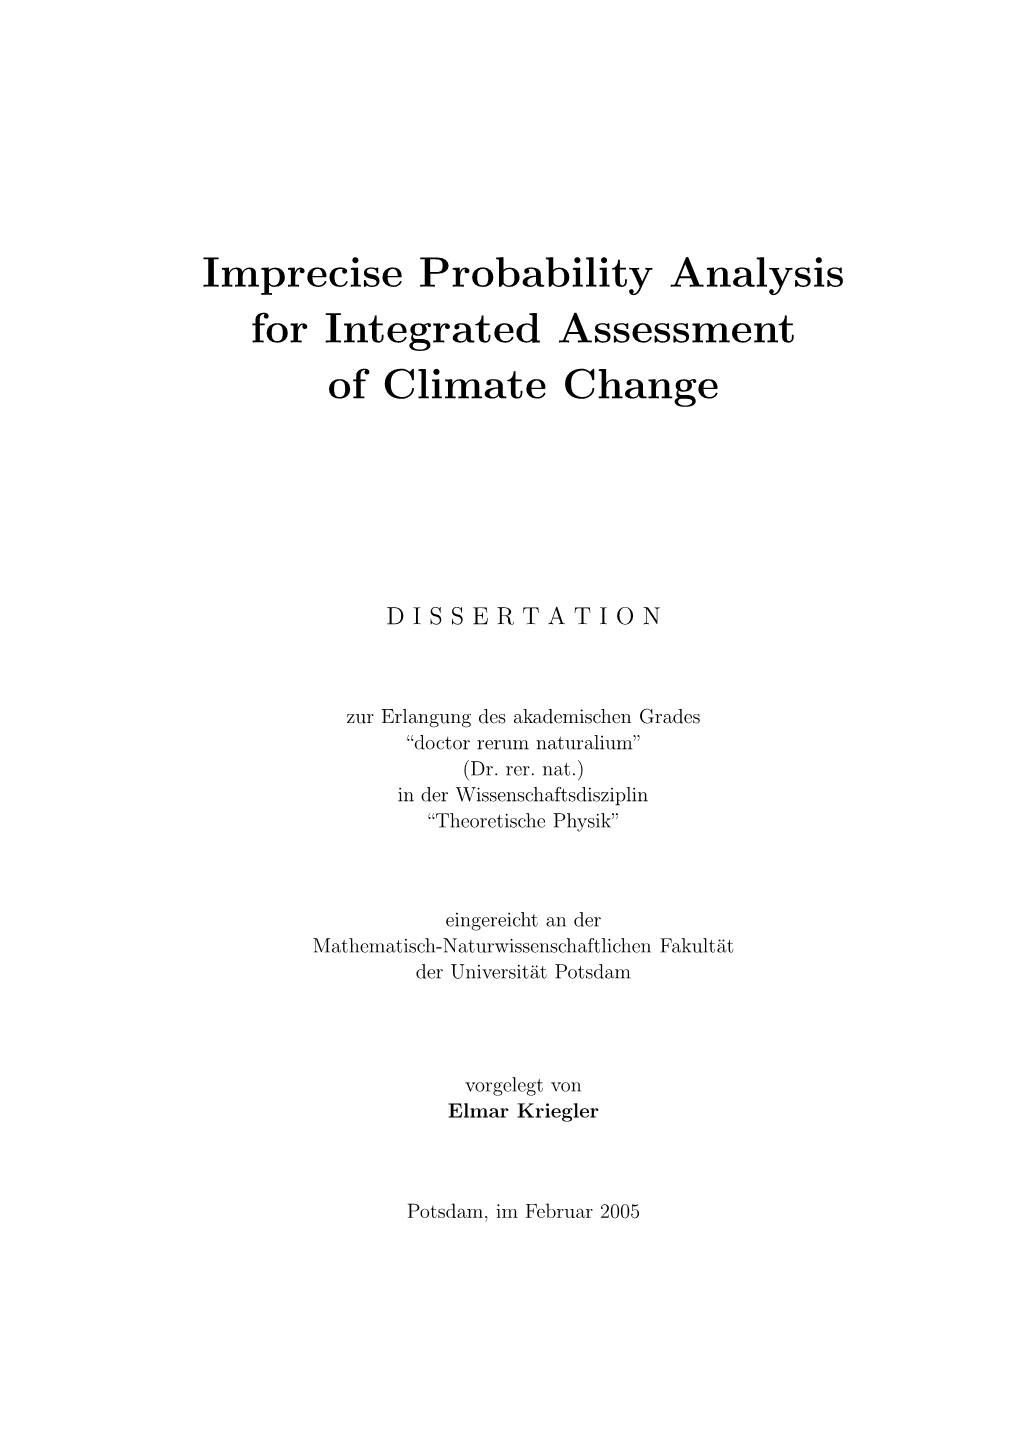 Imprecise Probability Analysis for Integrated Assessment of Climate Change